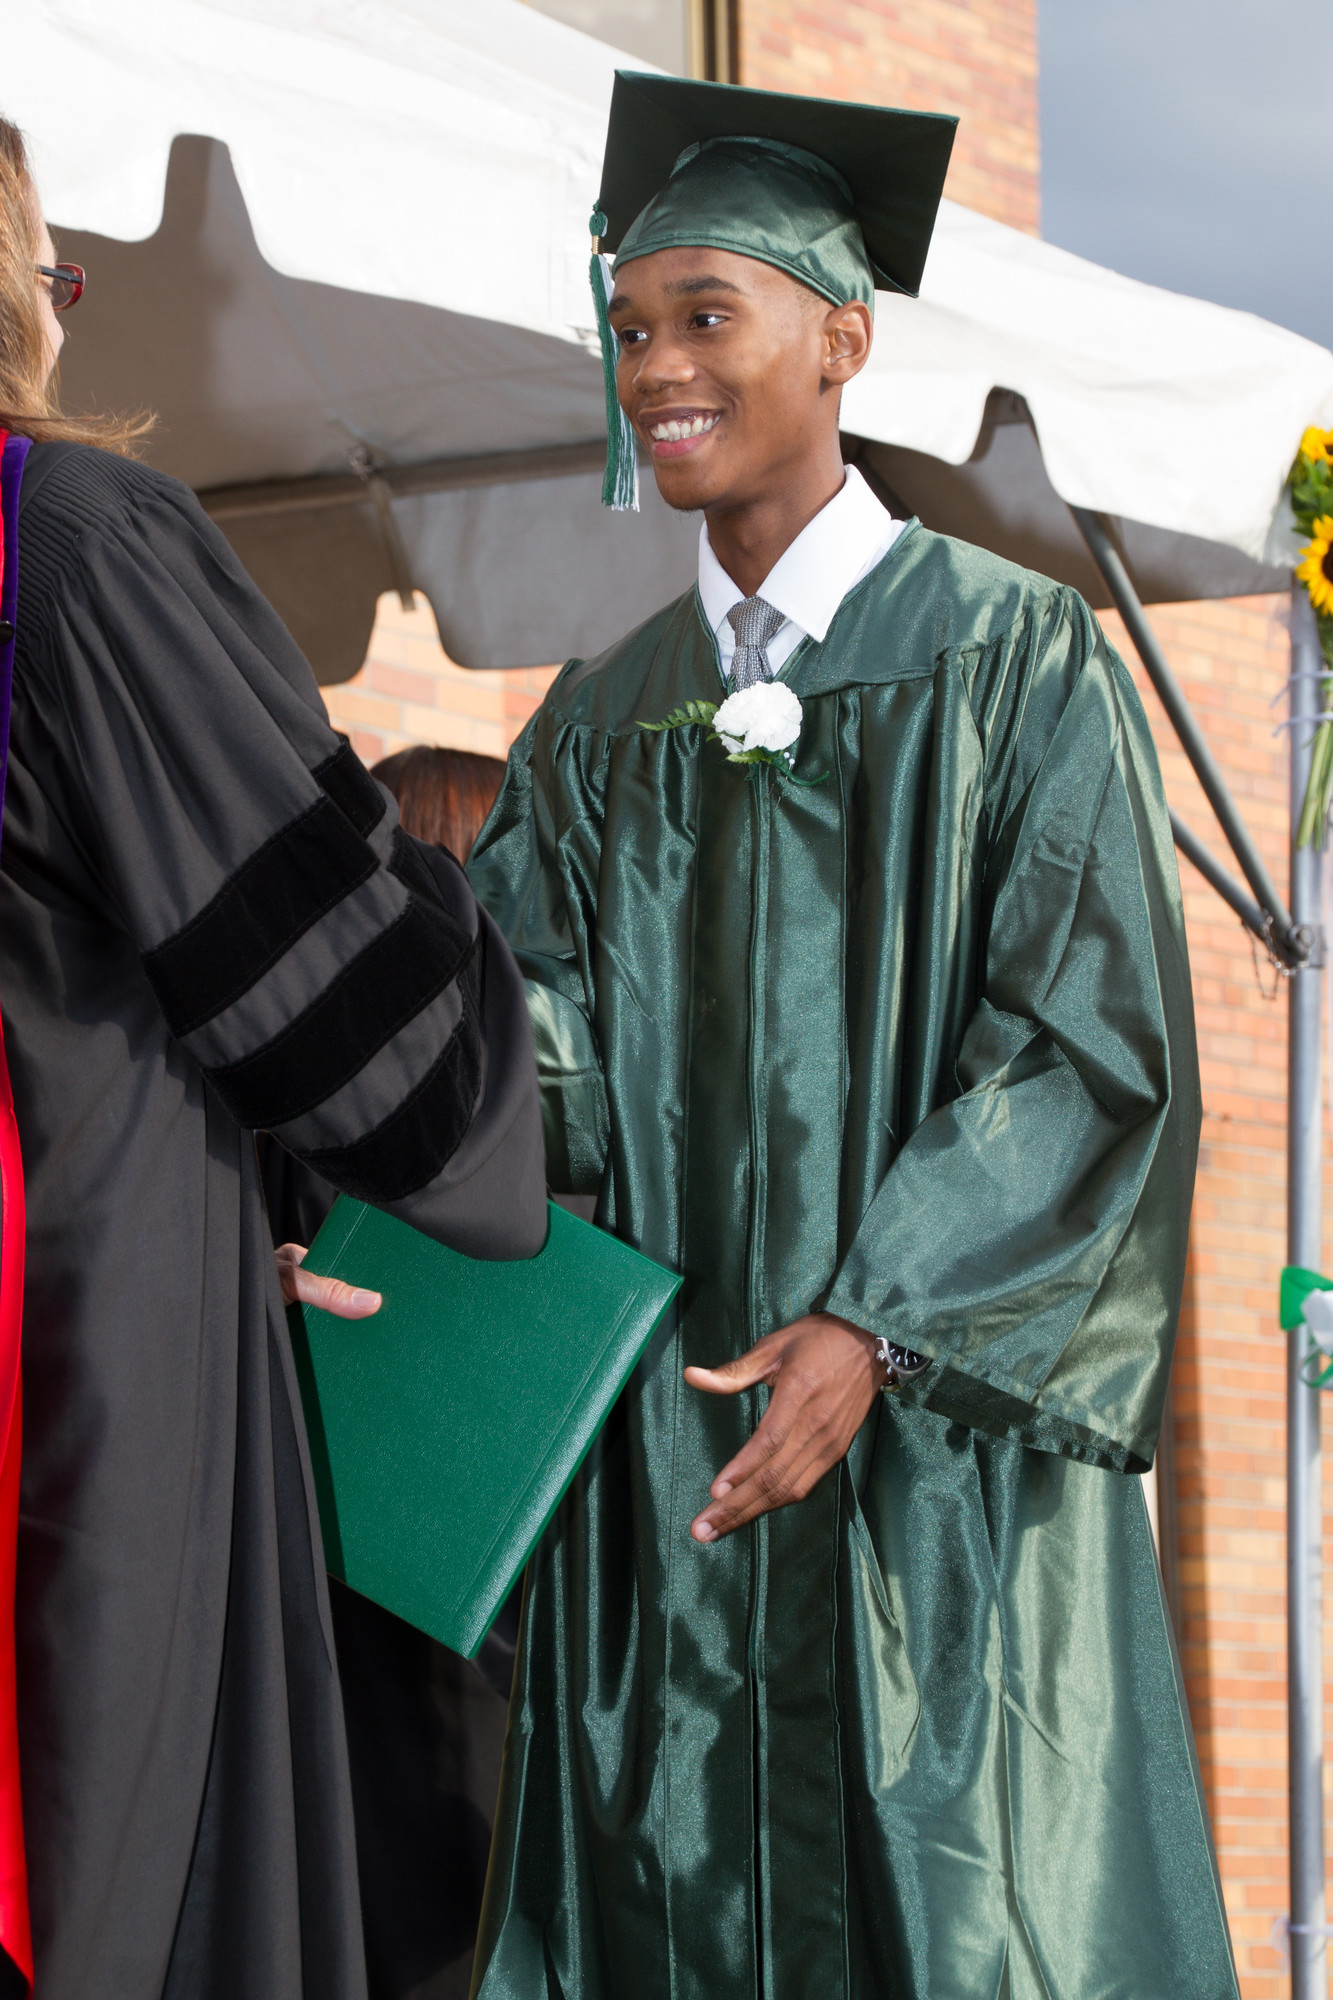 Jomar Pascal received his diploma on June 26.